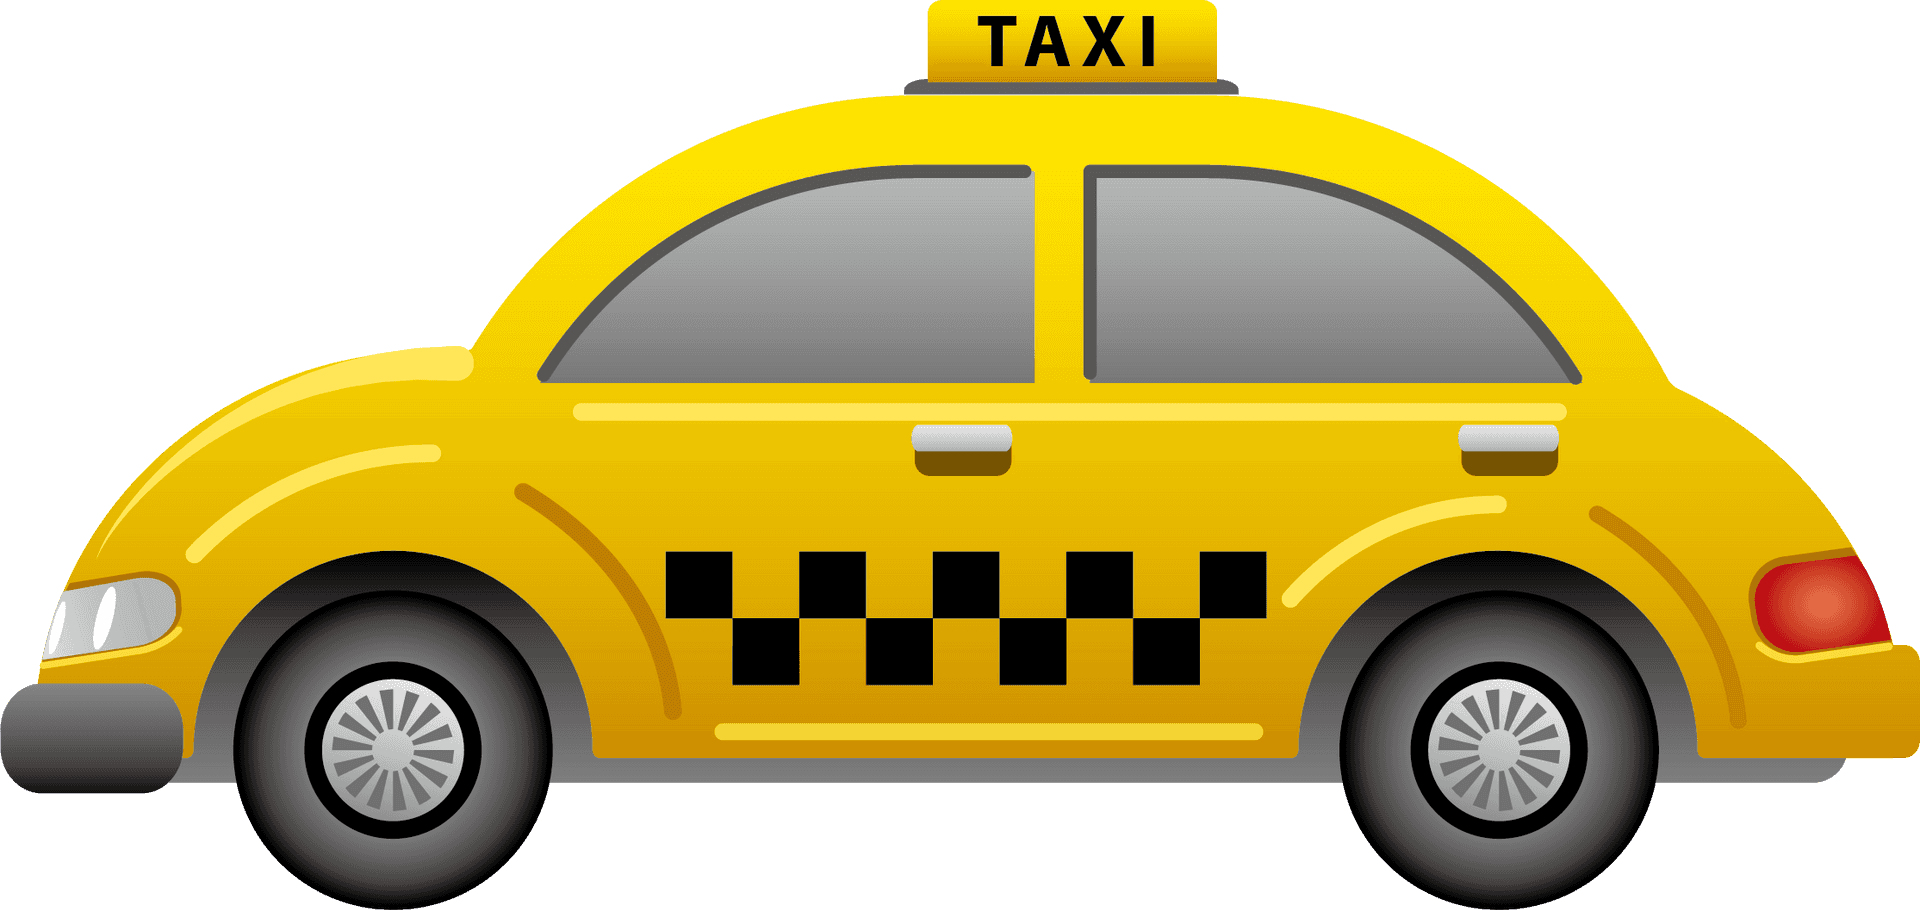 Yellow Cab Illustration.png PNG